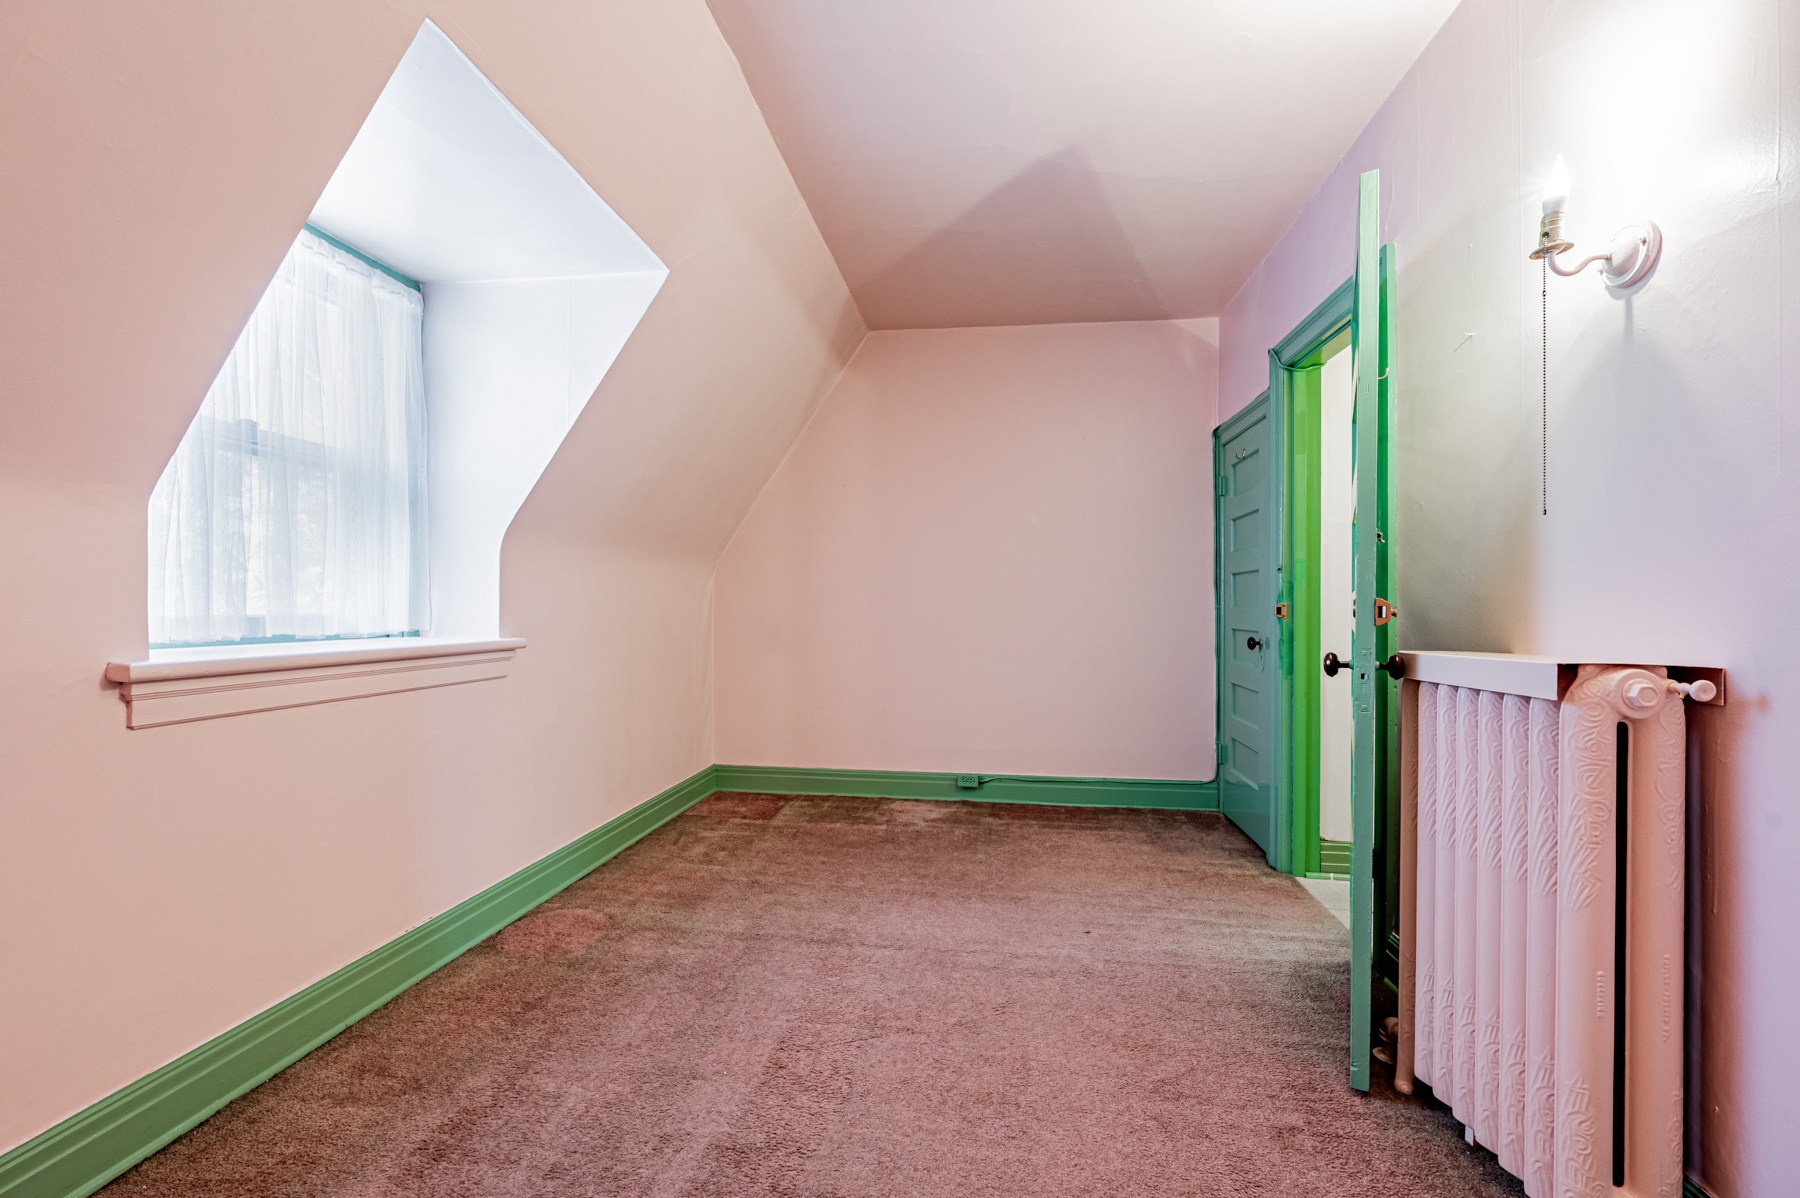 Bedroom with pink walls, carpet and window alcove.